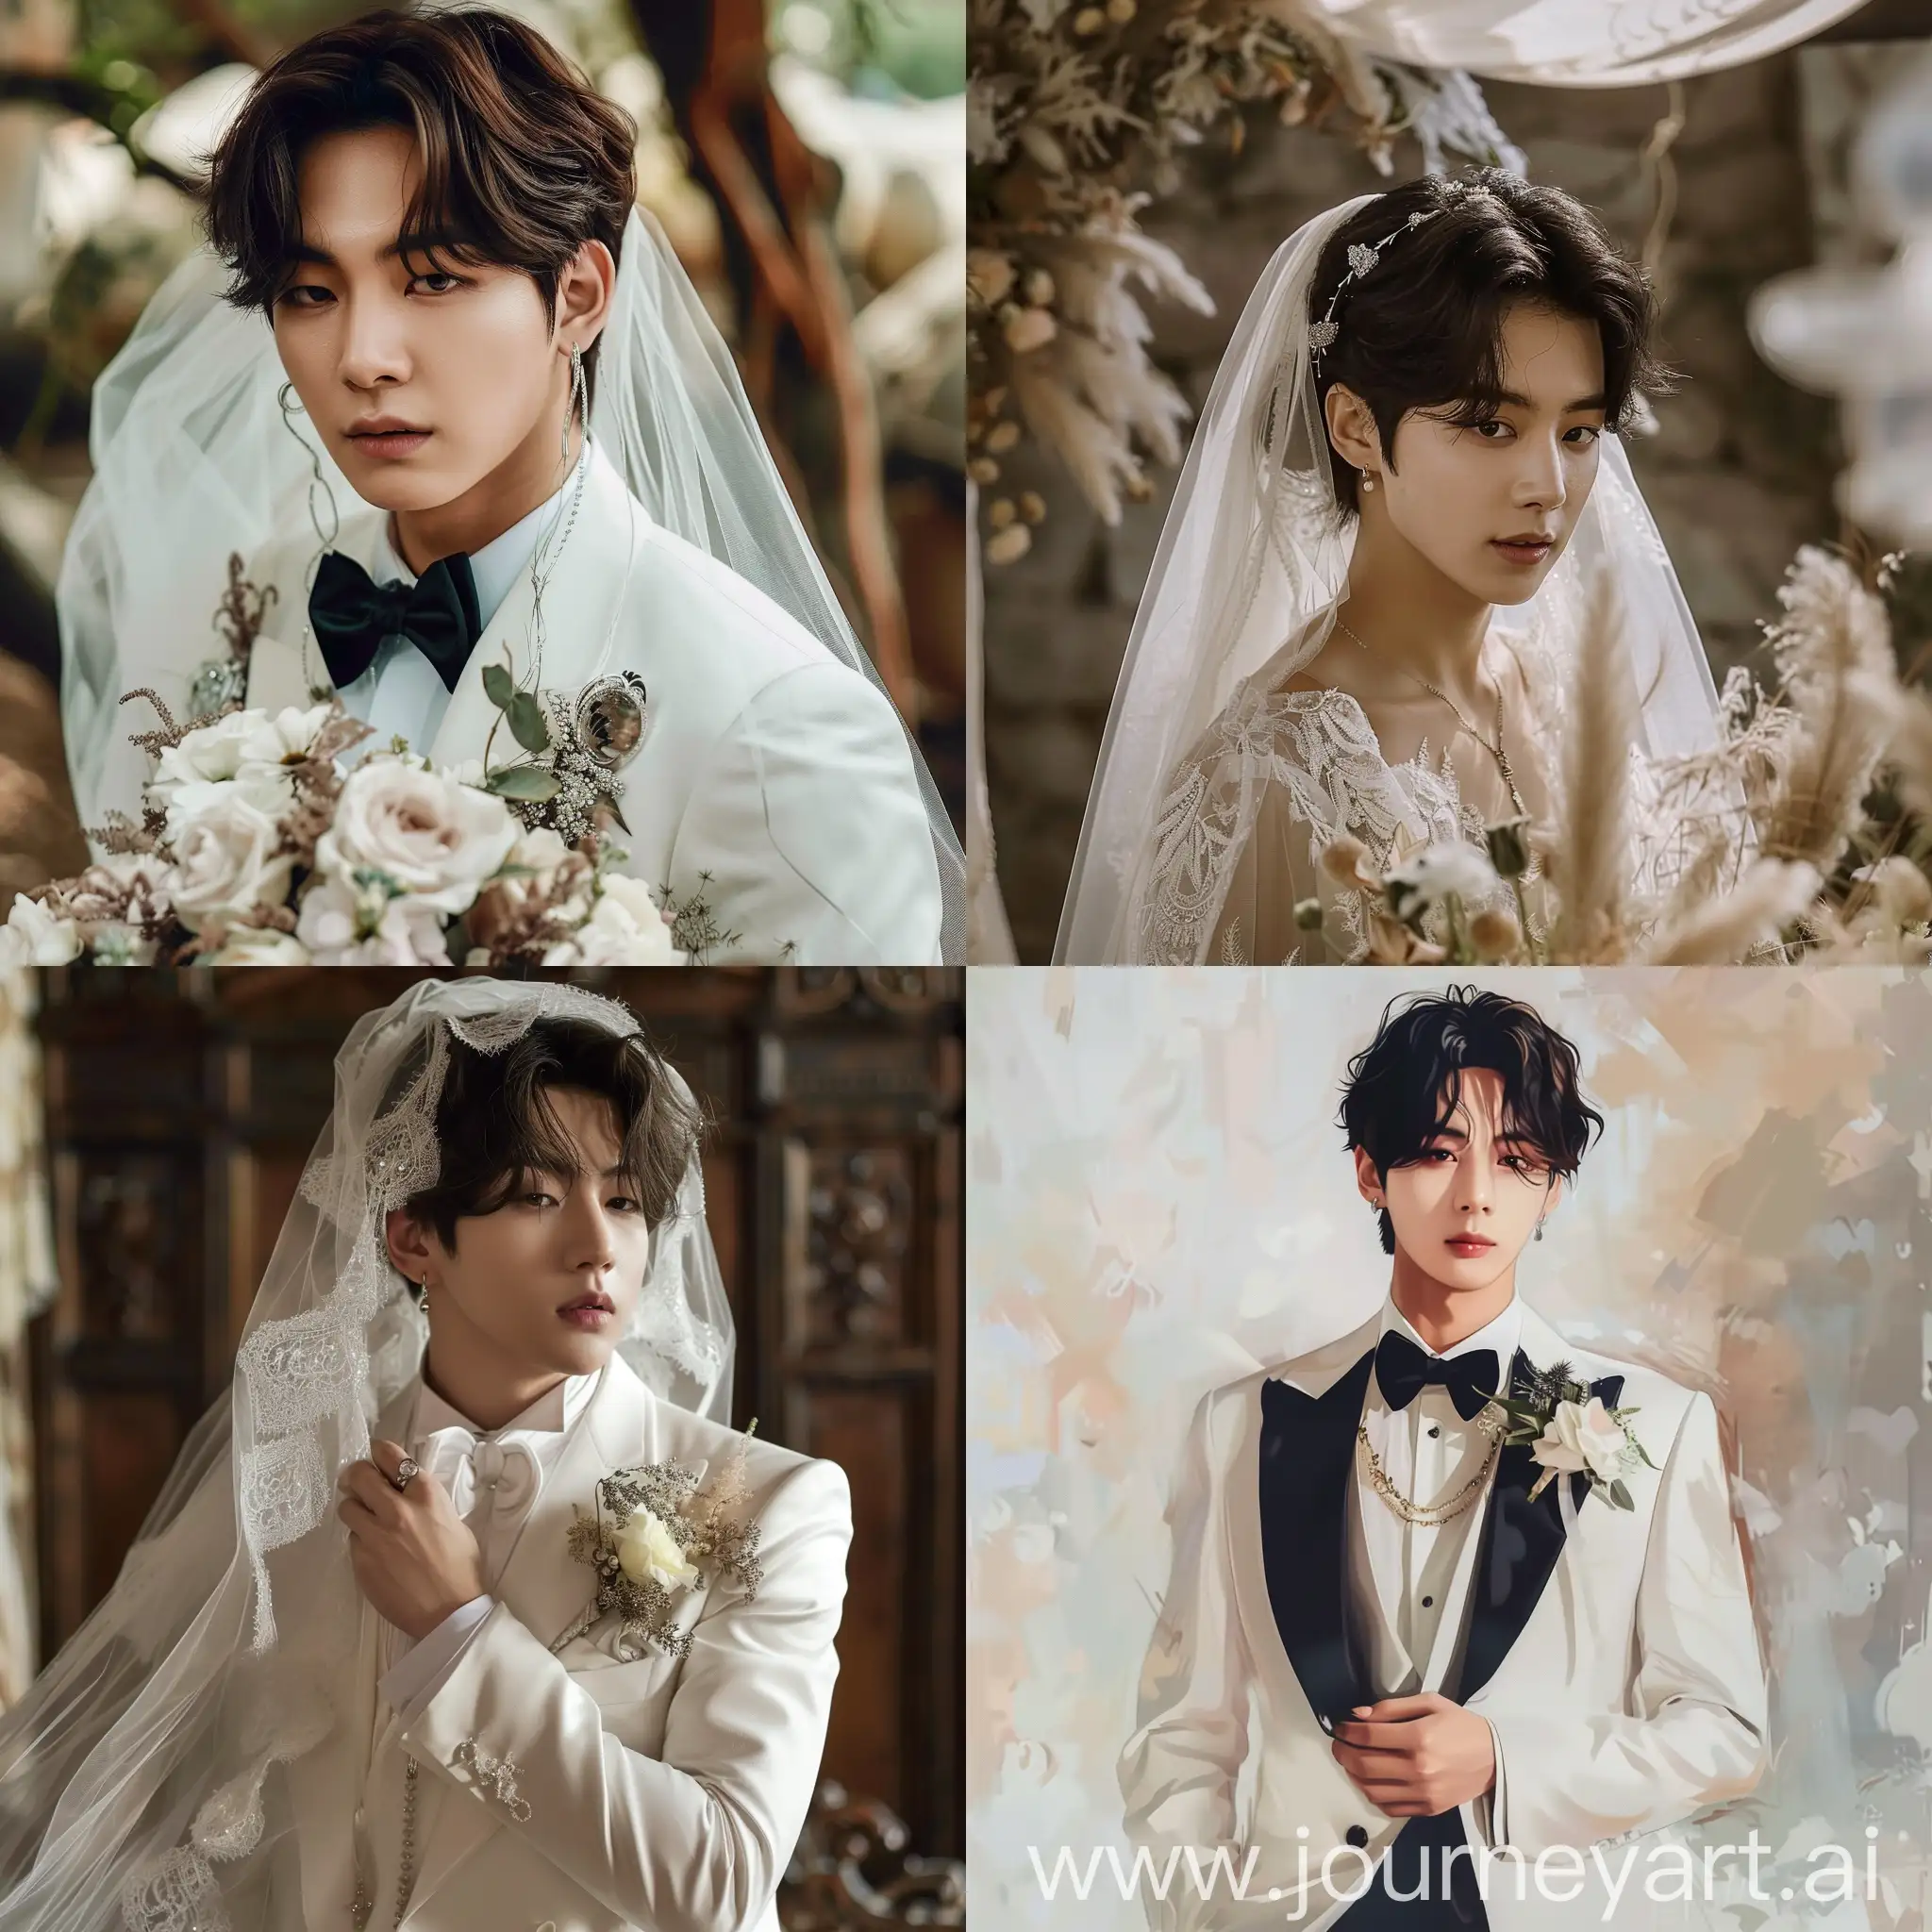 BTS-Taehyungs-Elegant-11-Aspect-Ratio-Wedding-Moment-with-14913-Attendees